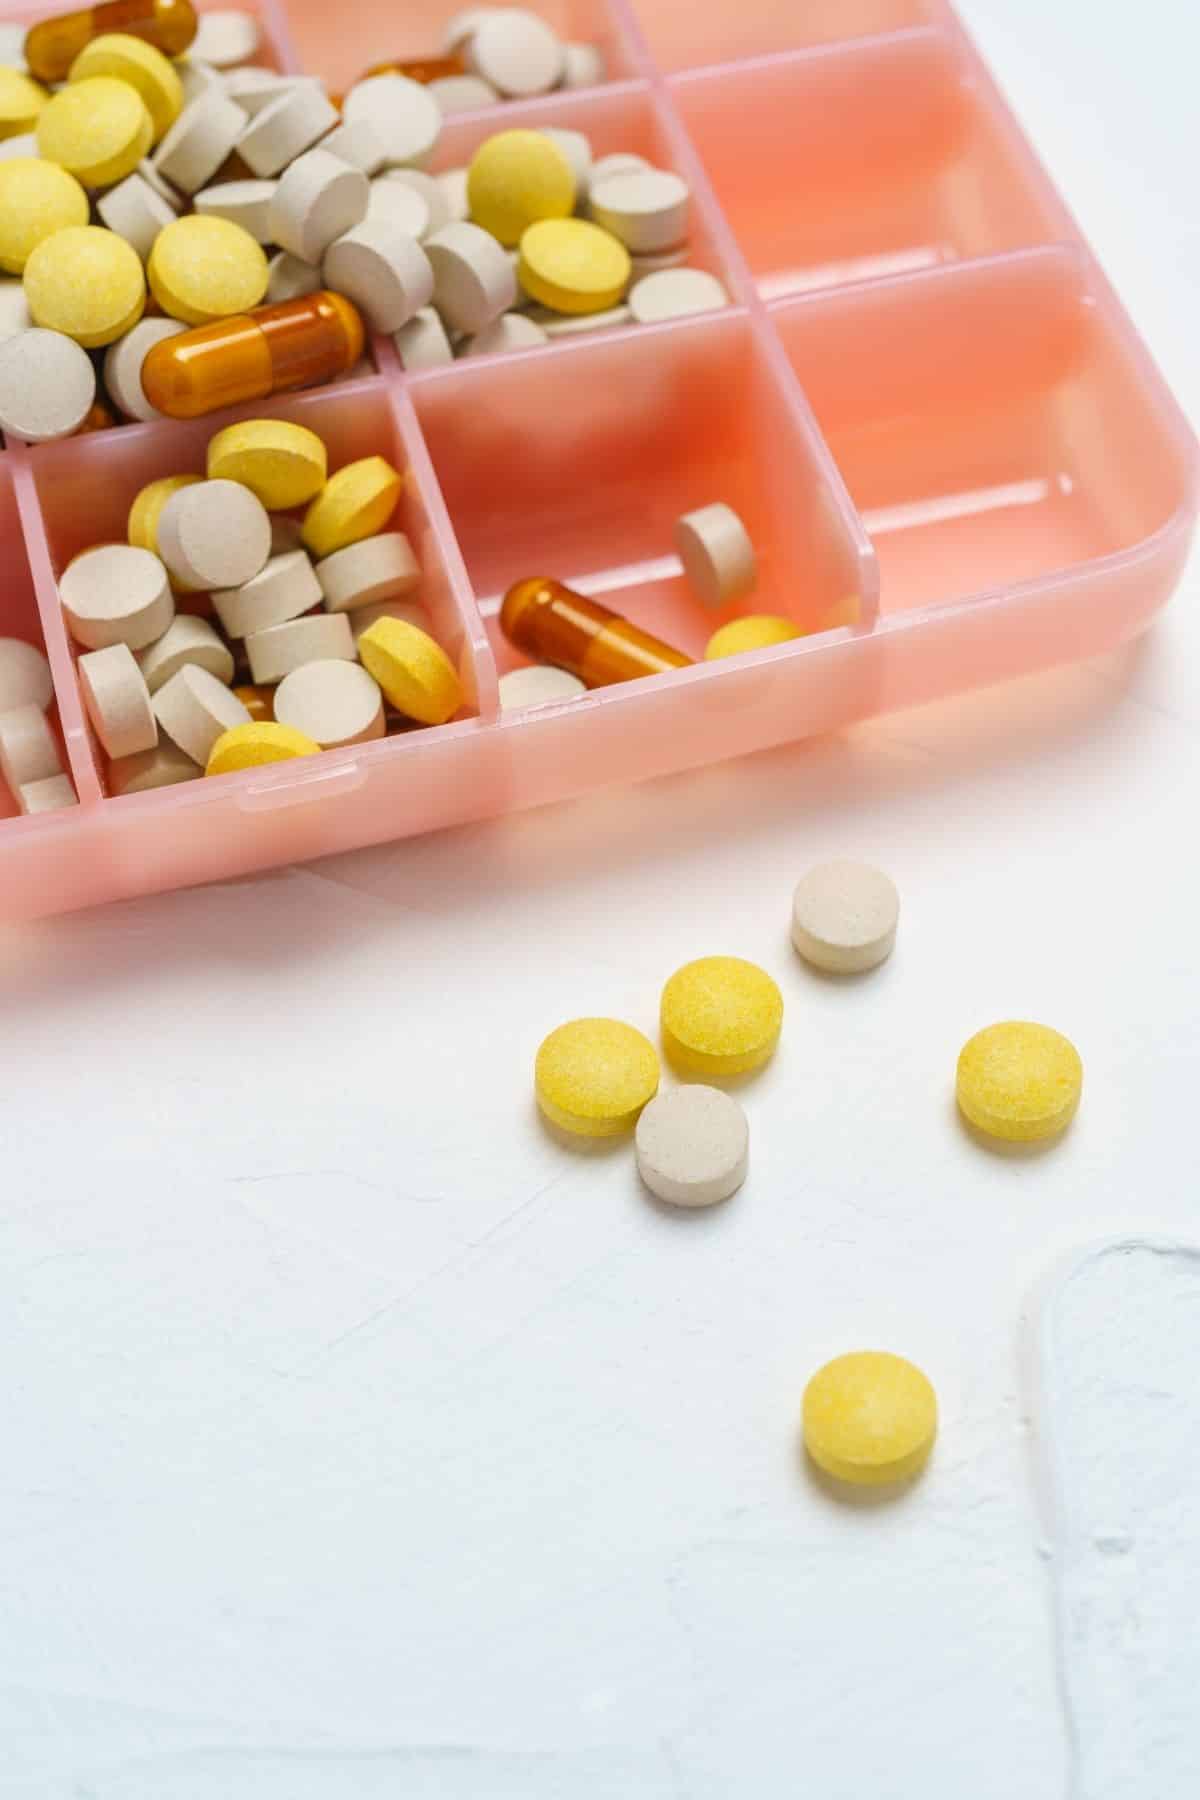 pink pill holder with tablets and capsules.